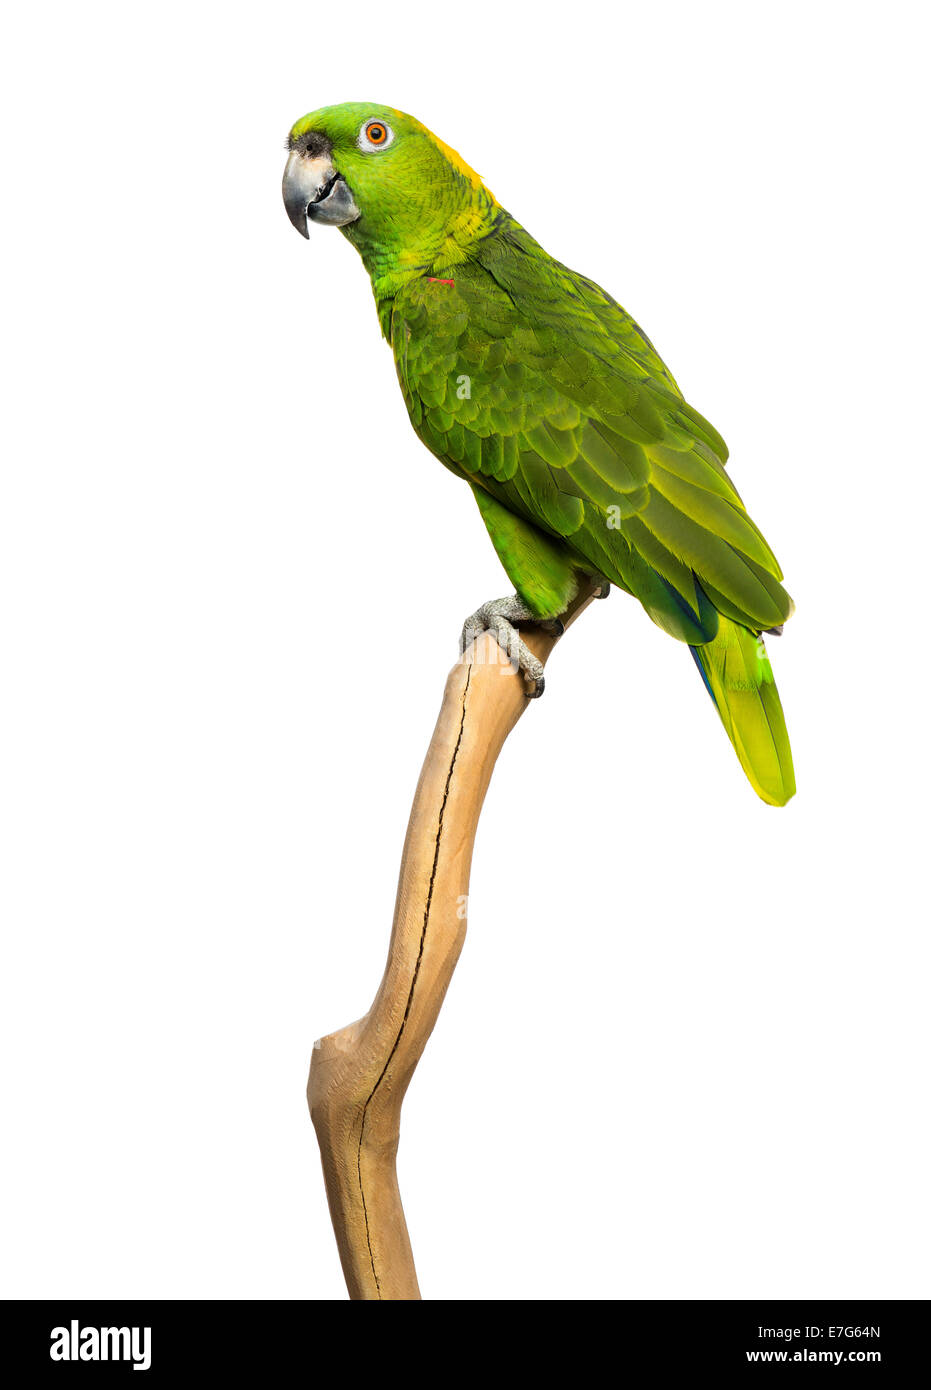 Yellow-naped parrot (6 years old) perched on a branch, isolated on white Stock Photo